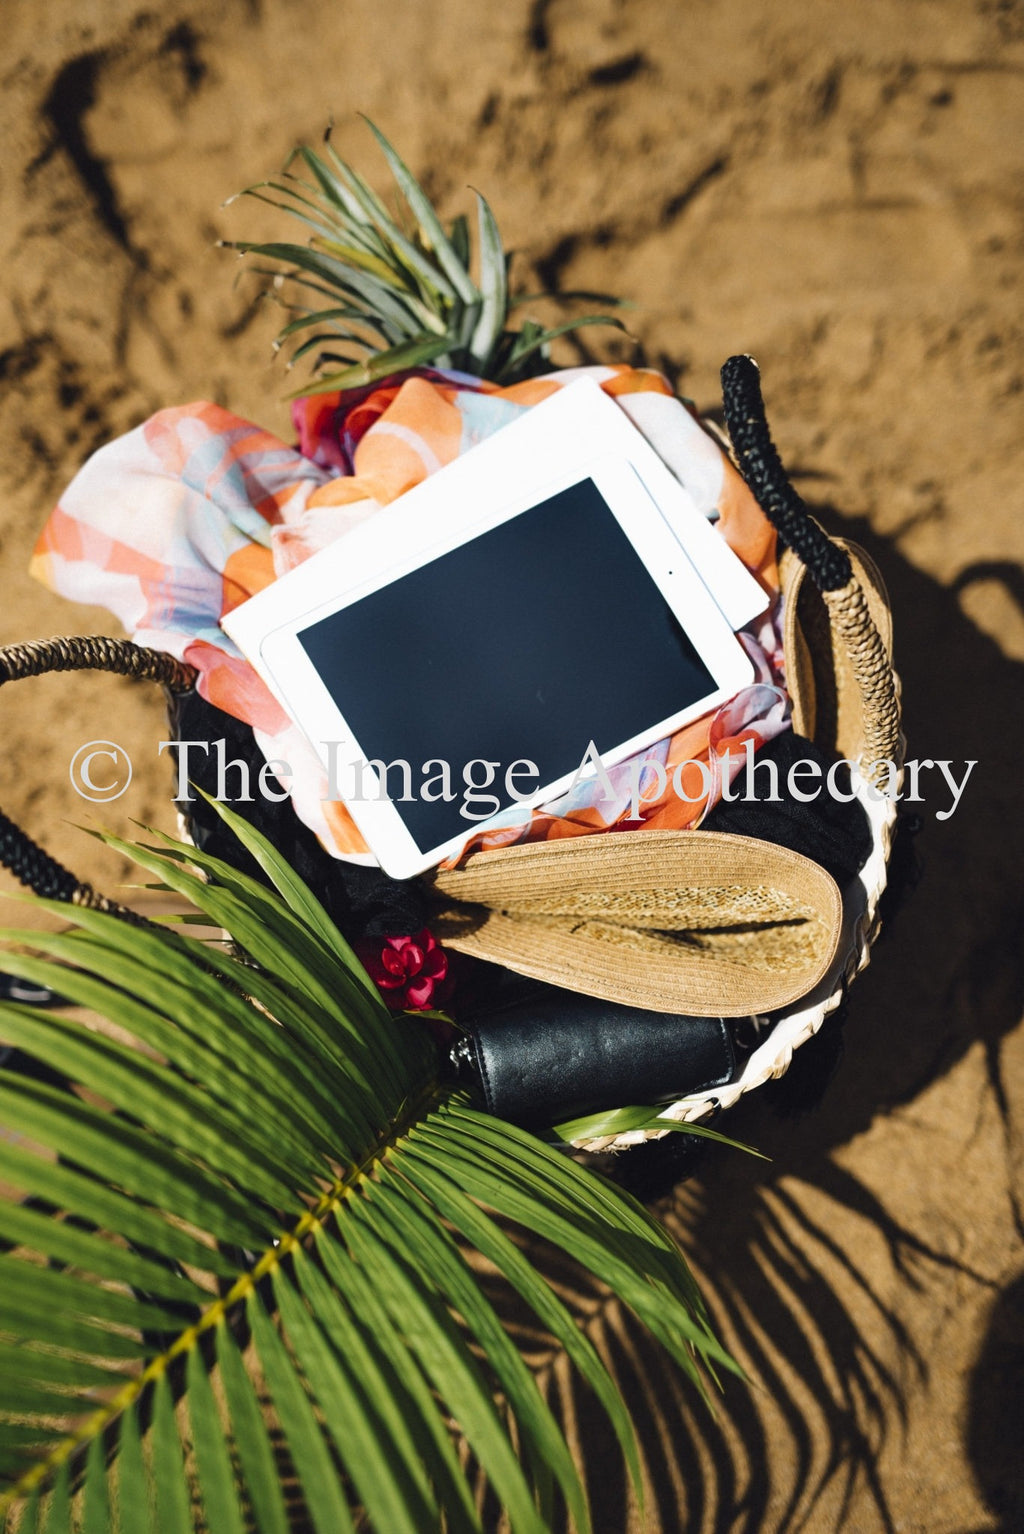 TheImageApothecary-6457 - Stock Photography by The Image Apothecary